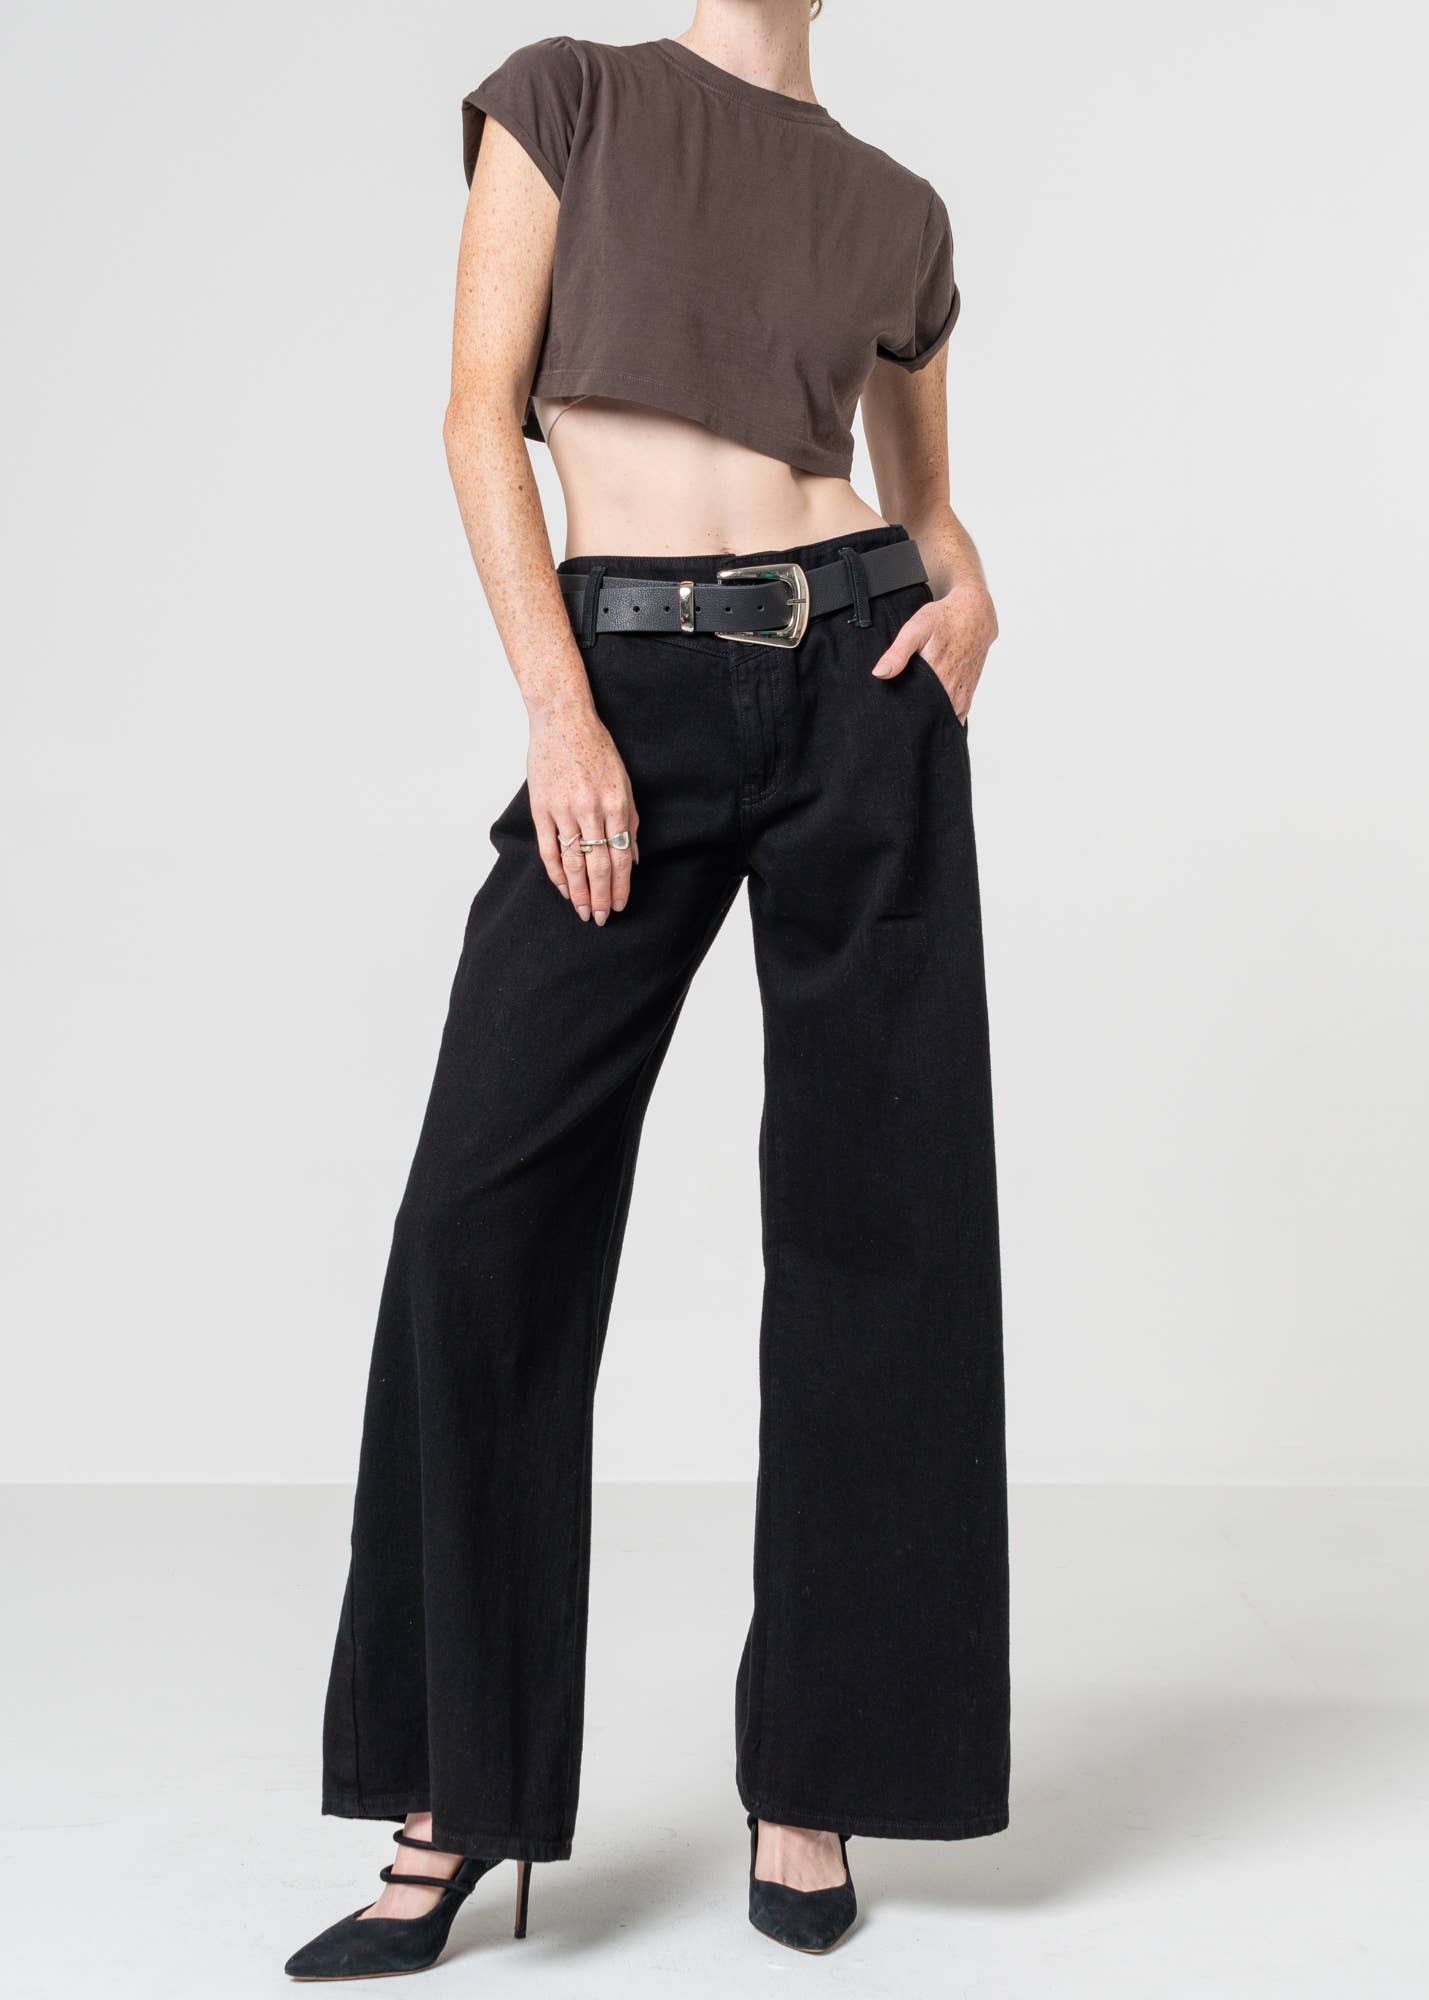 The Athena Wide Leg Jeans by NOEND Denim